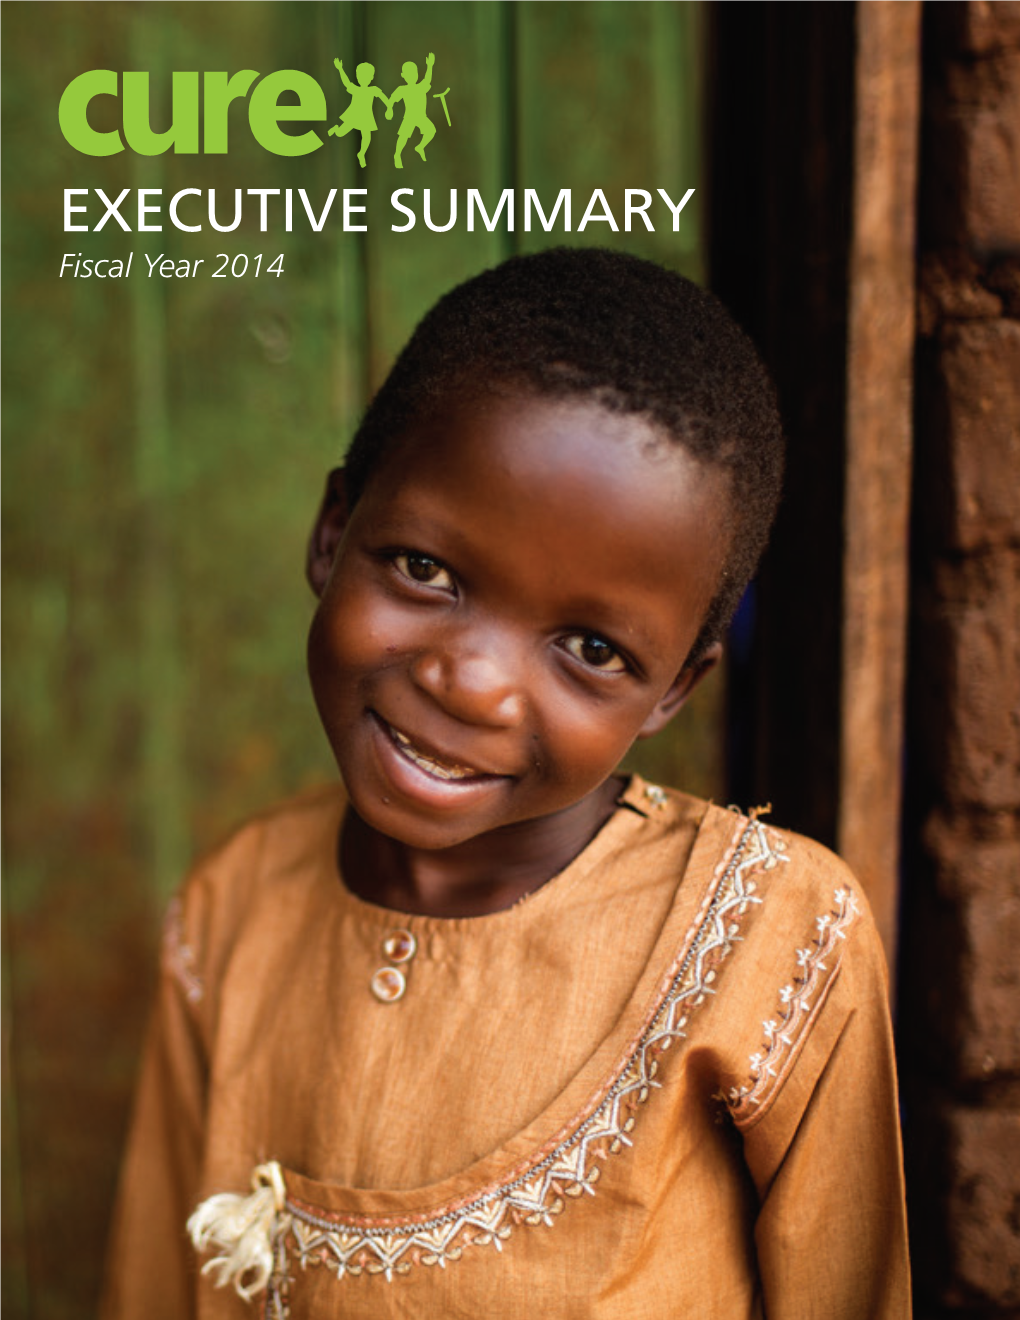 EXECUTIVE SUMMARY Fiscal Year 2014 HEALING the SICK & PROCLAIMING the KINGDOM of GOD